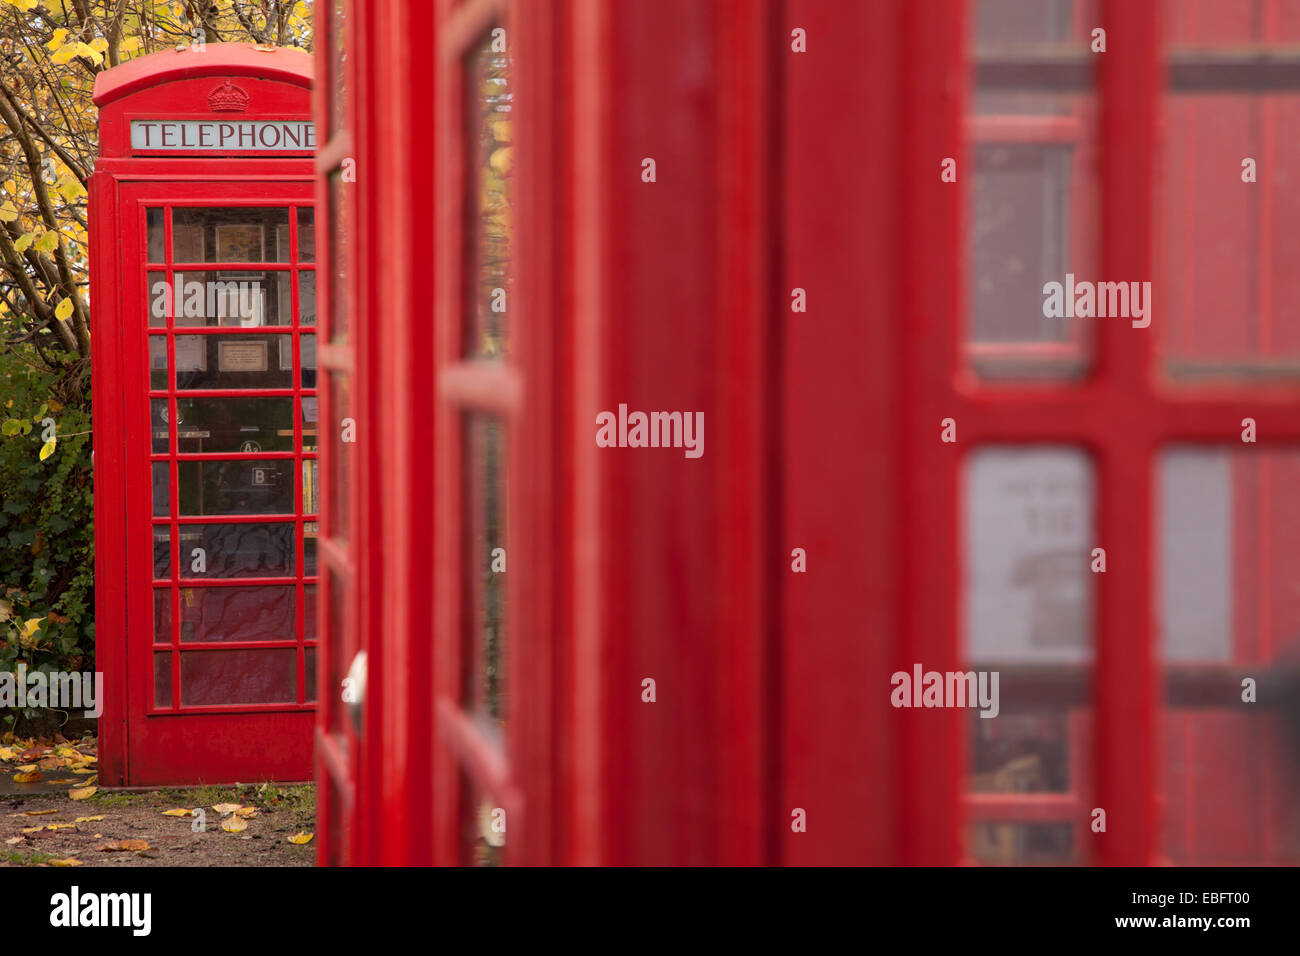 Red telephone boxes as symbols of British Telecom phones prevalent before the rise of mobile technology Stock Photo